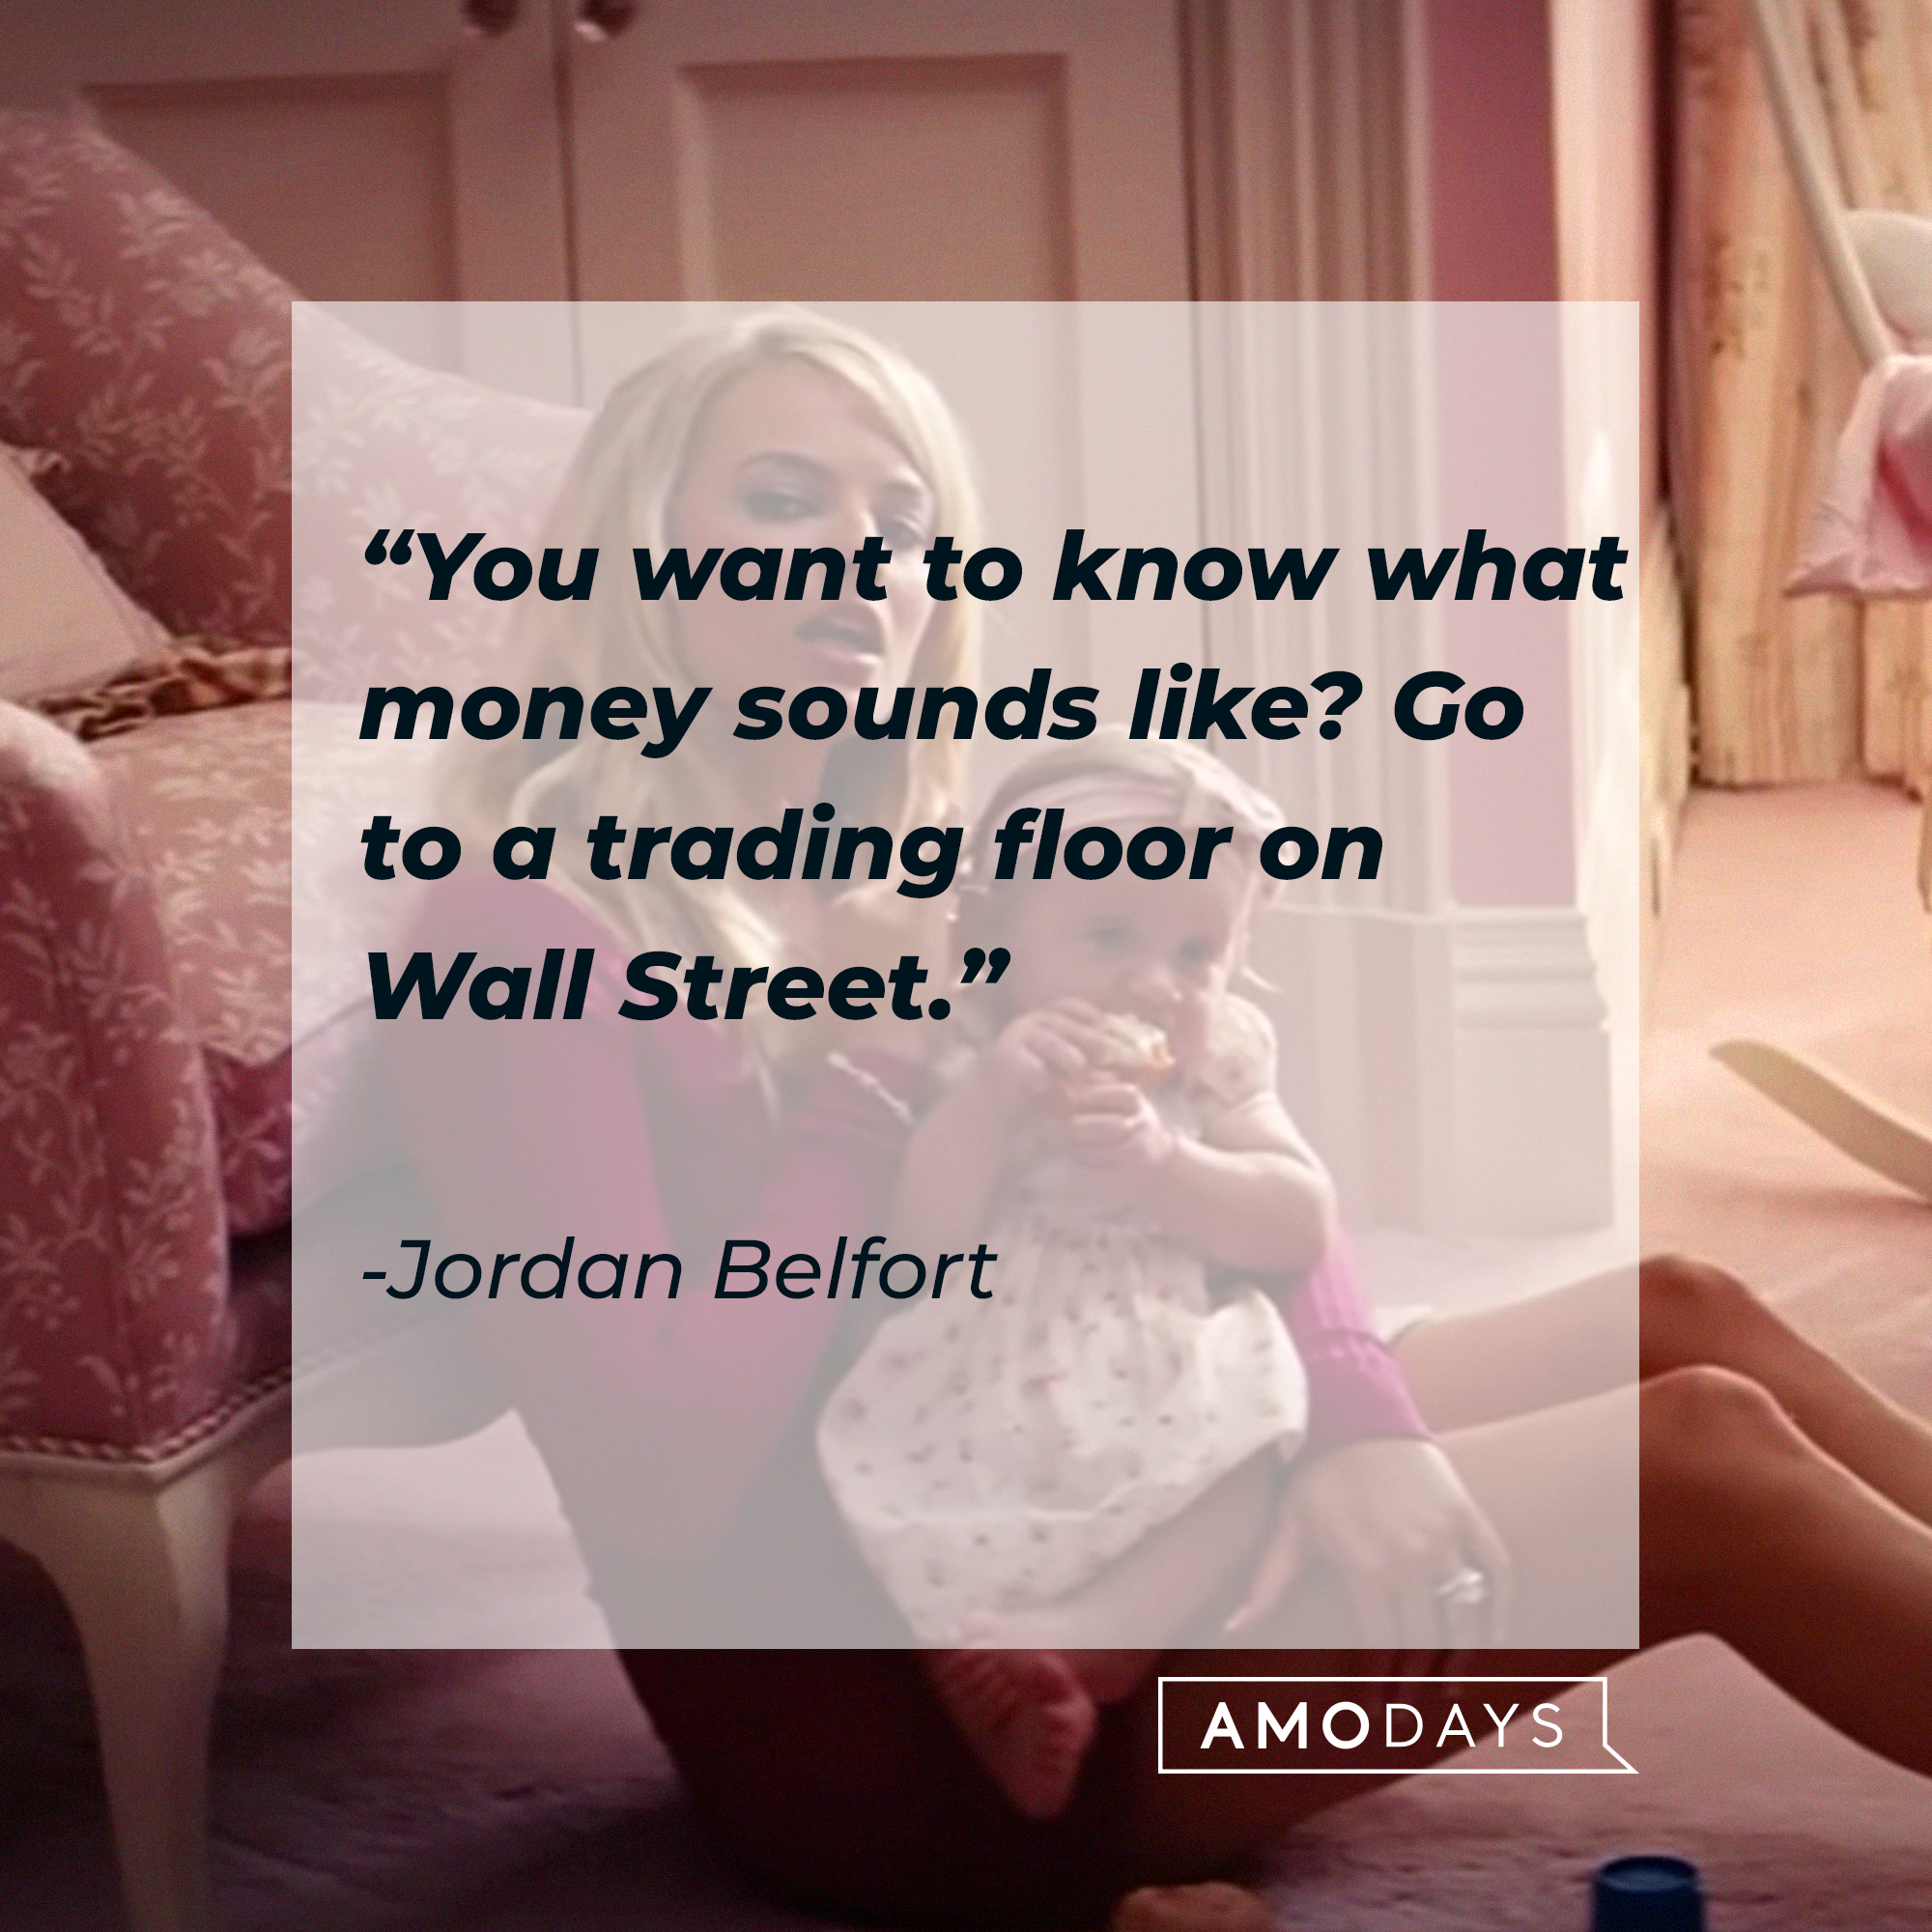 Margot Robbie with Jordan Belfort's quote: "You want to know what money sounds like? Go to a trading floor on Wall Street." | Source: Youtube/paramountmovies